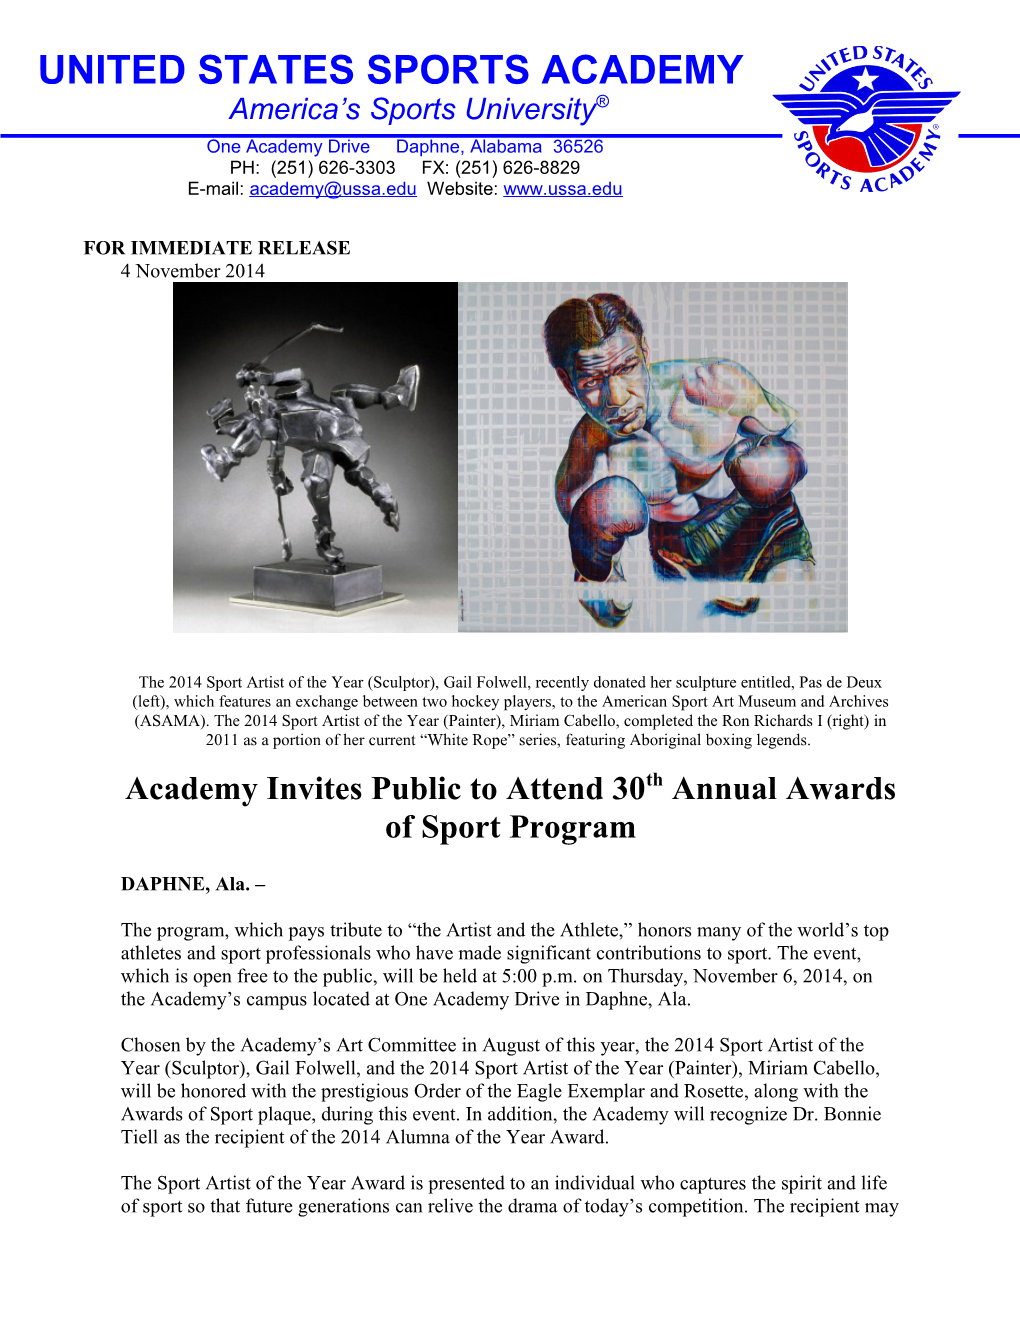 Academy Invites Public to Attend 30Th Annual Awards of Sport Program